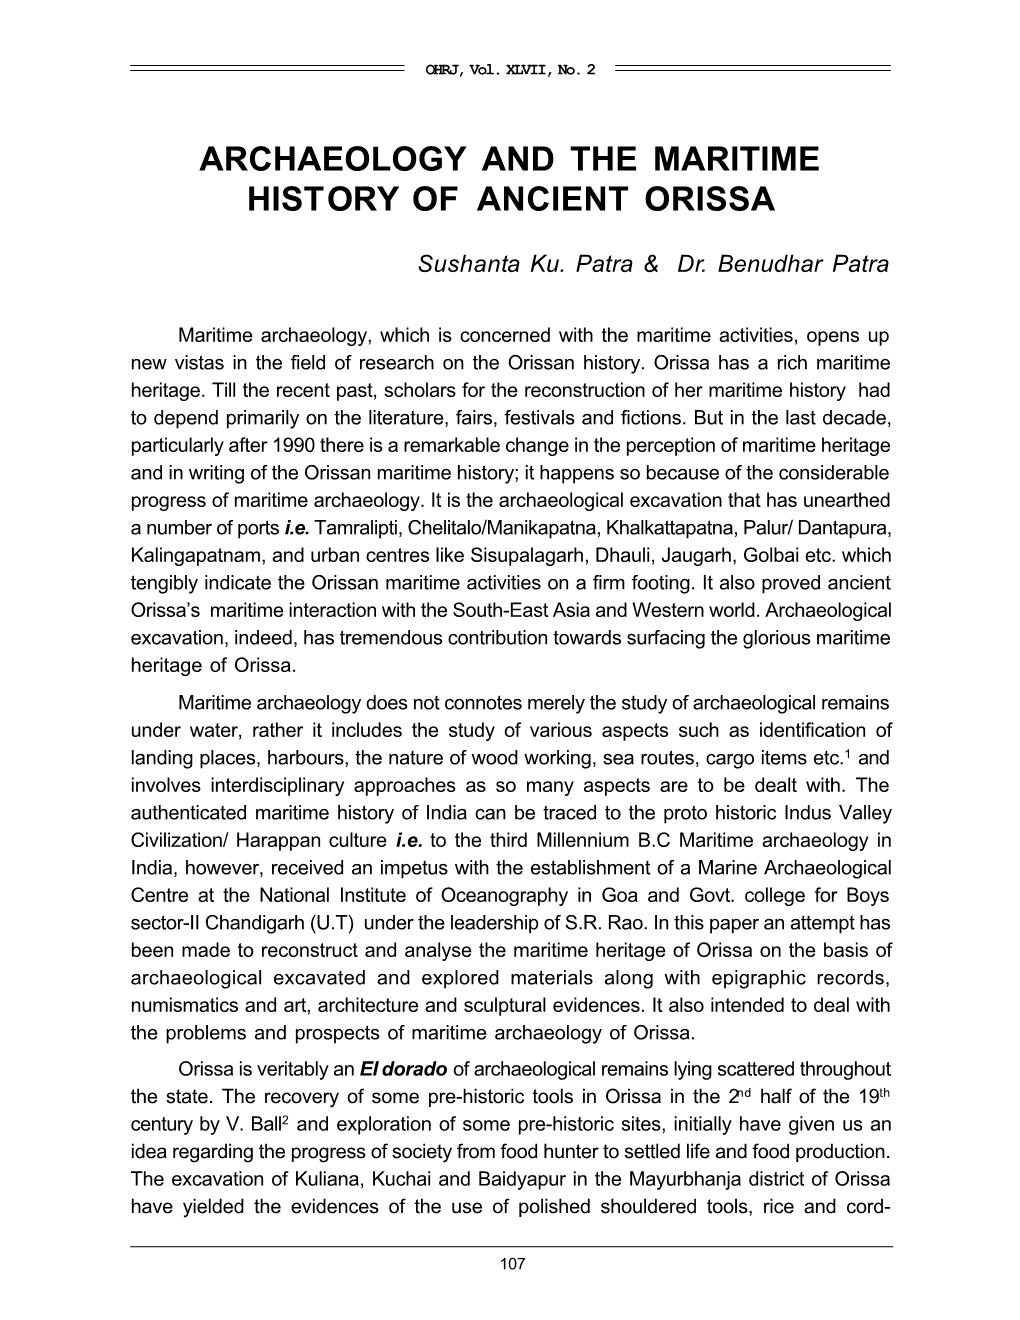 Archaeology and the Maritime History of Ancient Orissa